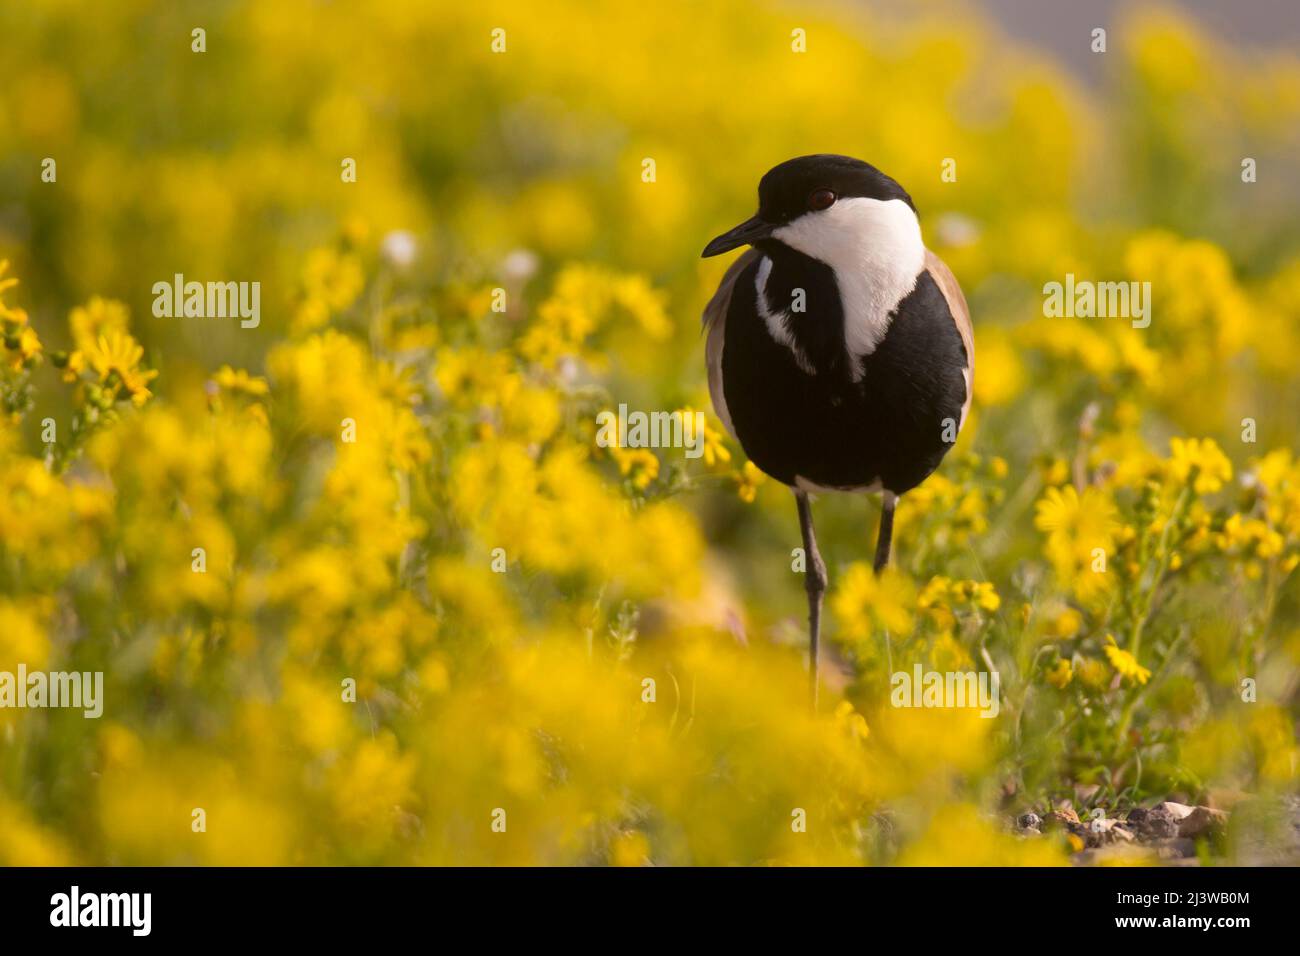 Spur-winged Lapwing (Vanellus spinosus) standing in a spring field. Photographed in Israel in February Stock Photo